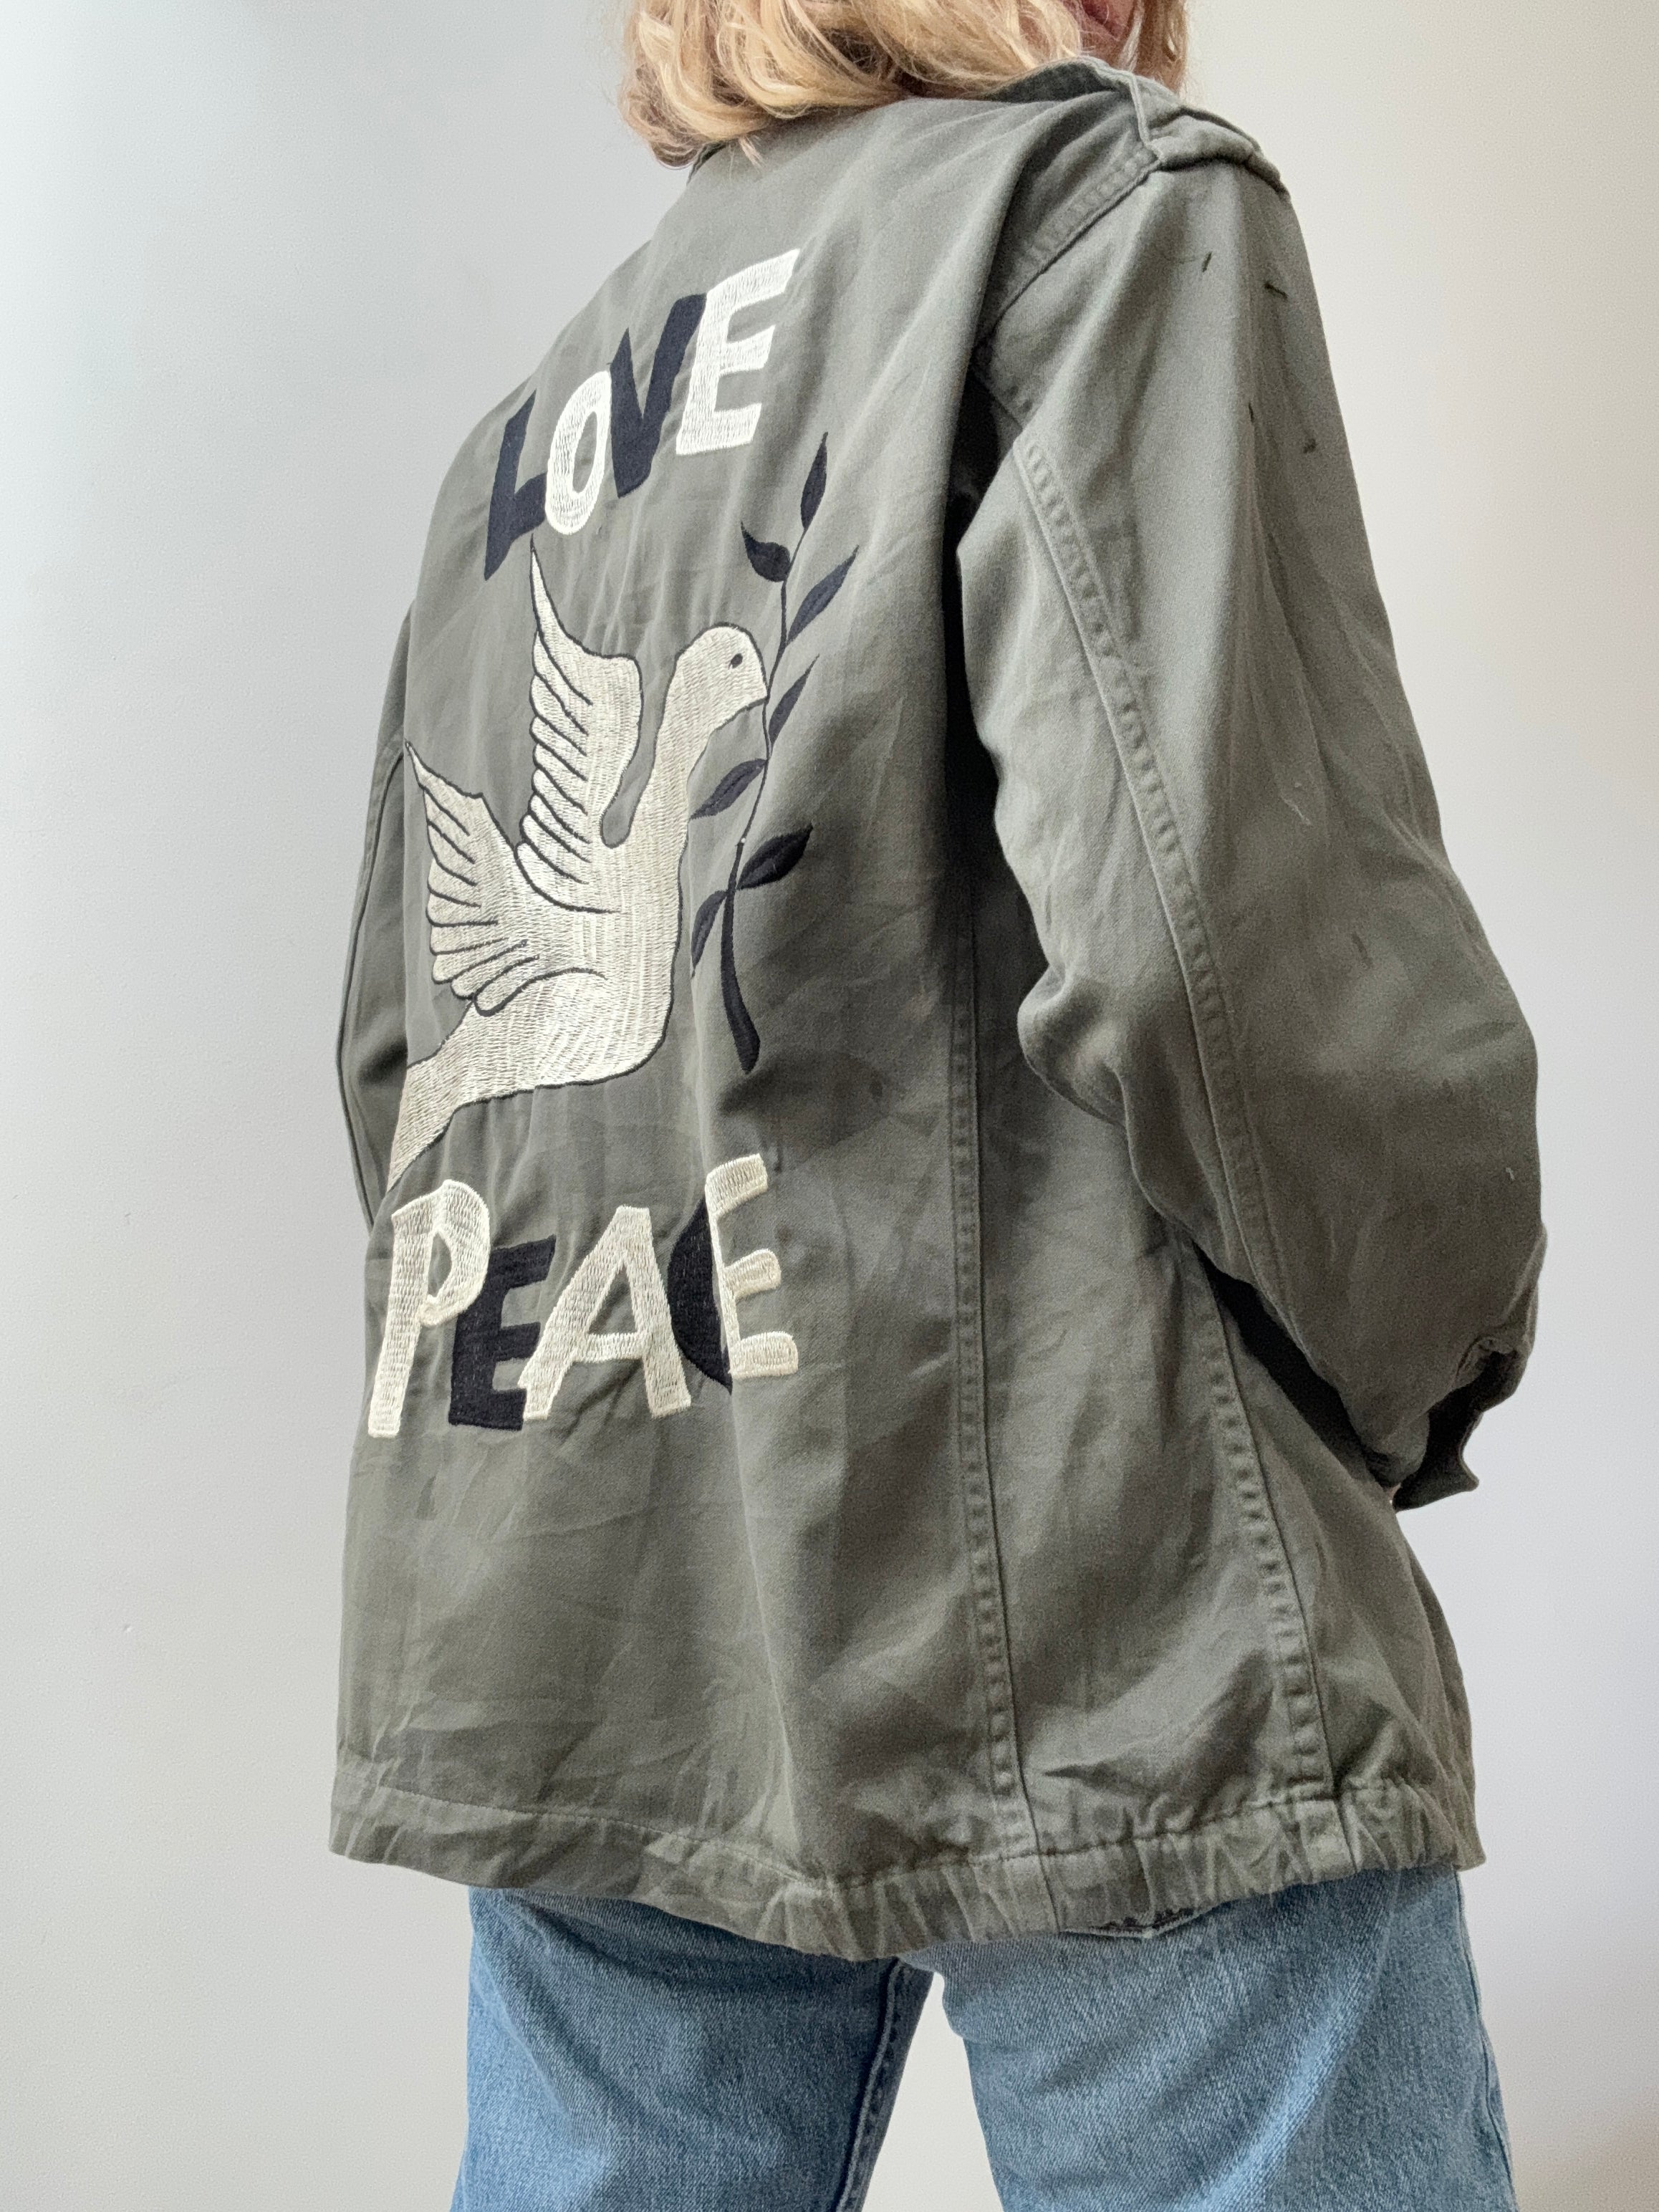 Future Nomads Jackets XSmall Love Peace Army Jacket AW246